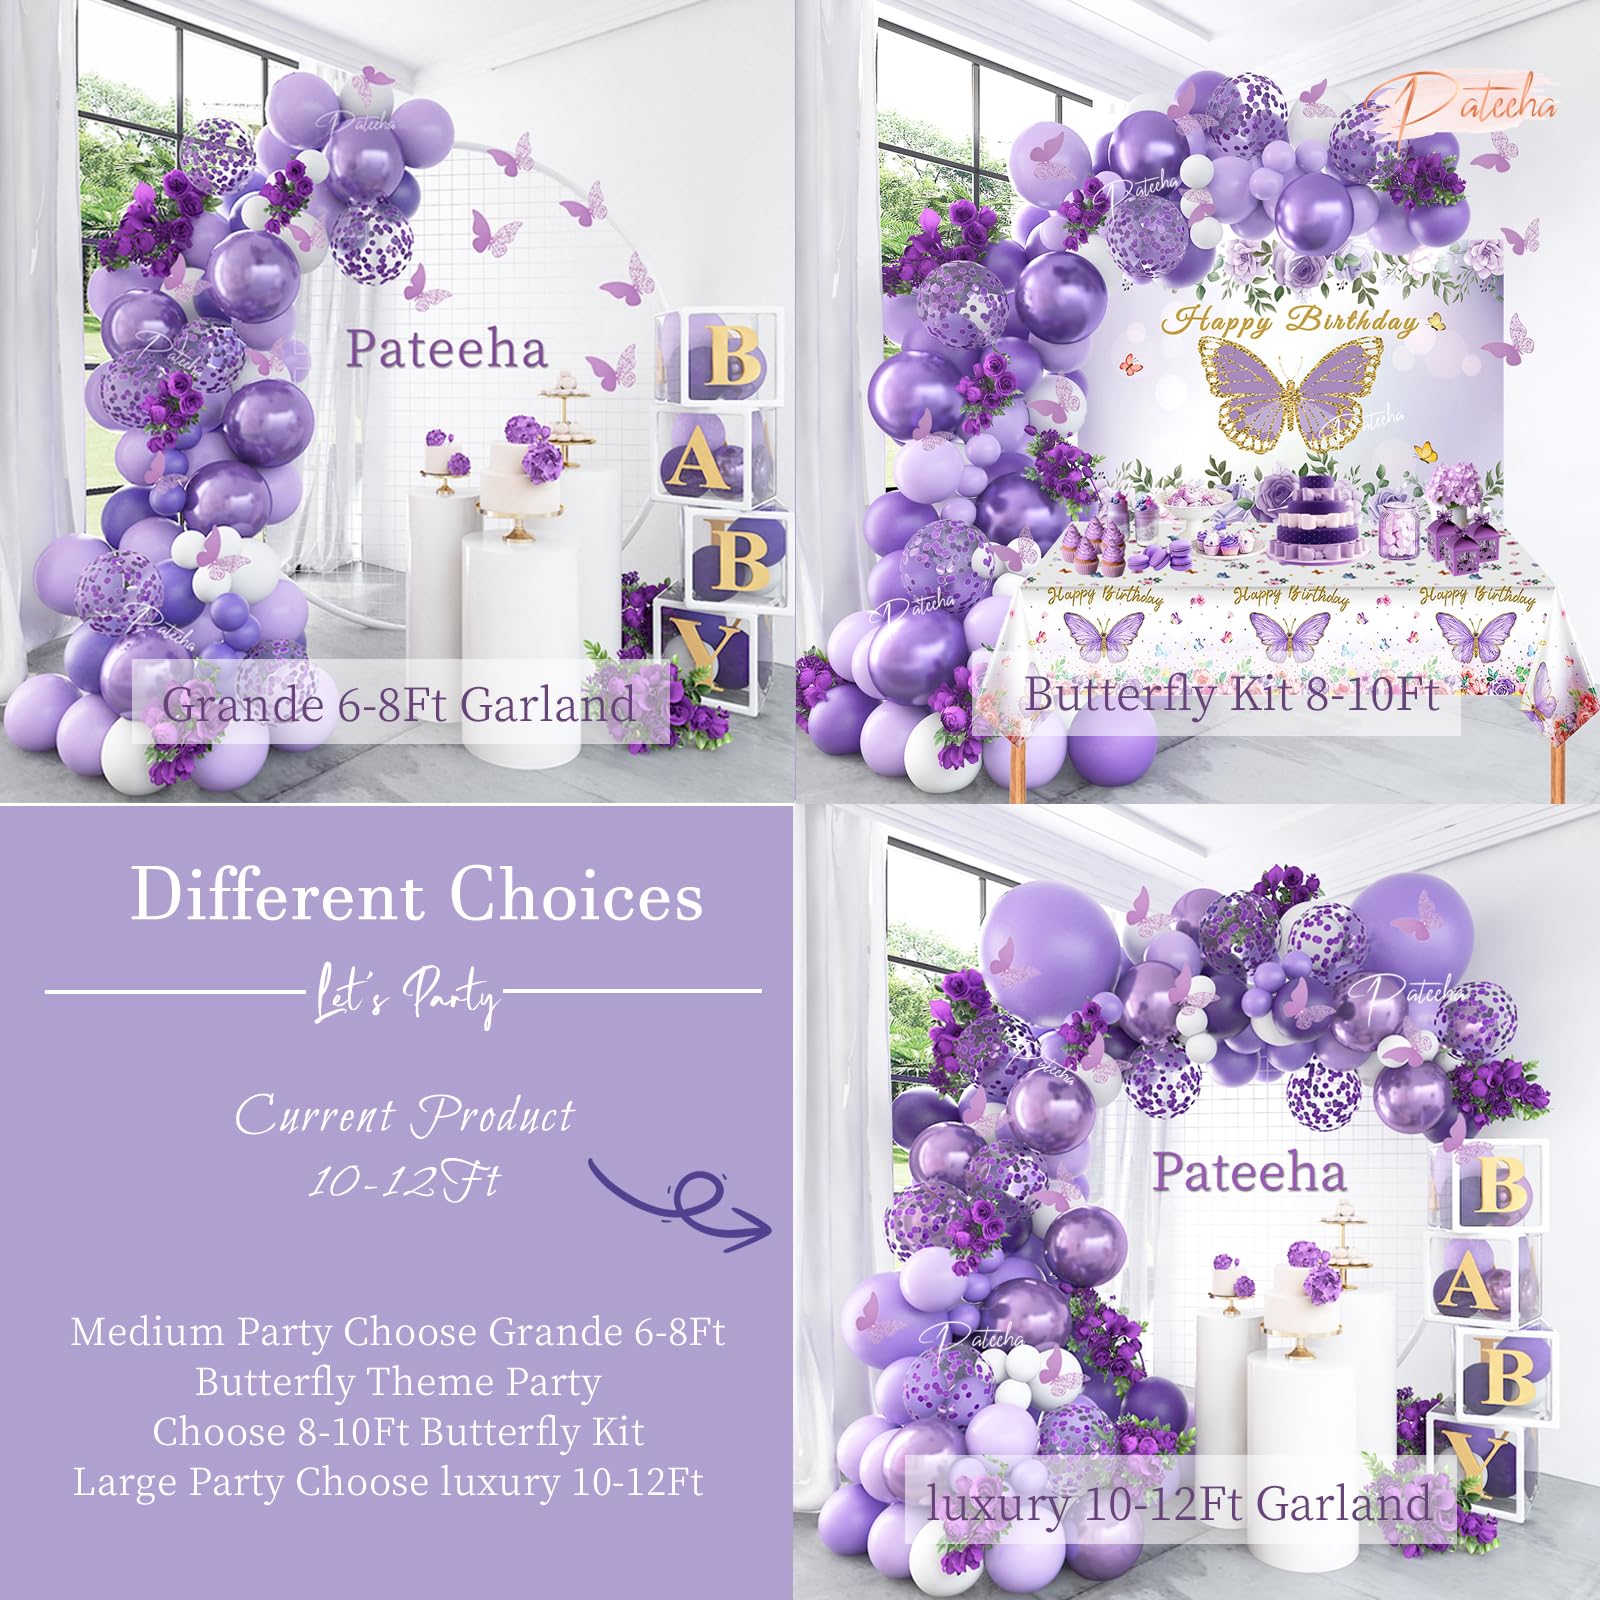 Pateeha Purple Balloon Arch Kit 145 Pcs Butterfly Baby Shower Decorations for Girl White Lavender Balloons Garland Metallic Purple Confetti Balloons for Birthday Party Decorations